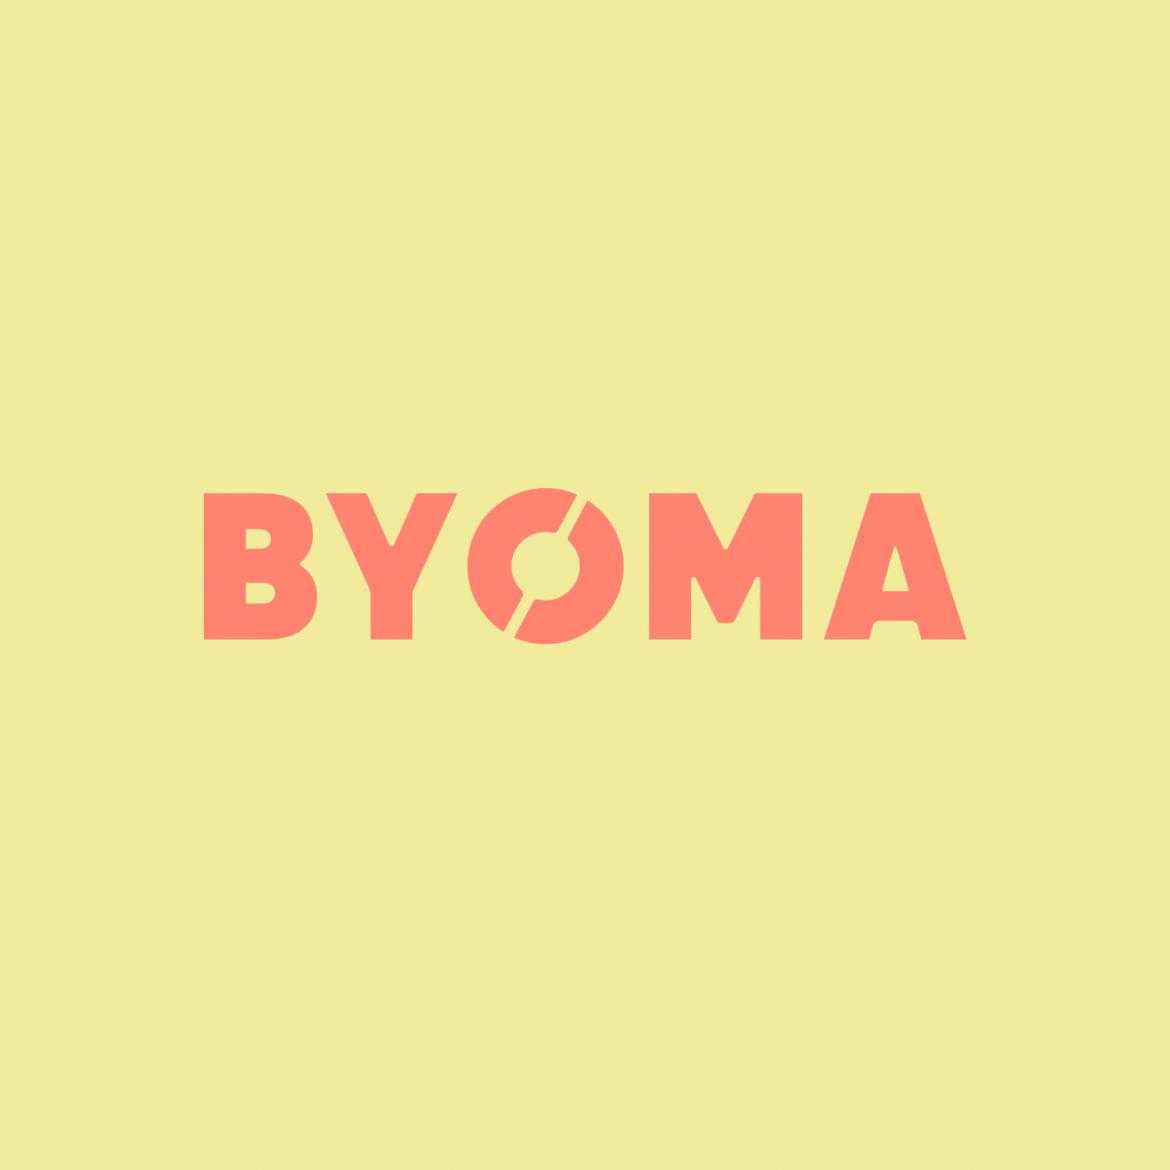 Byoma's images